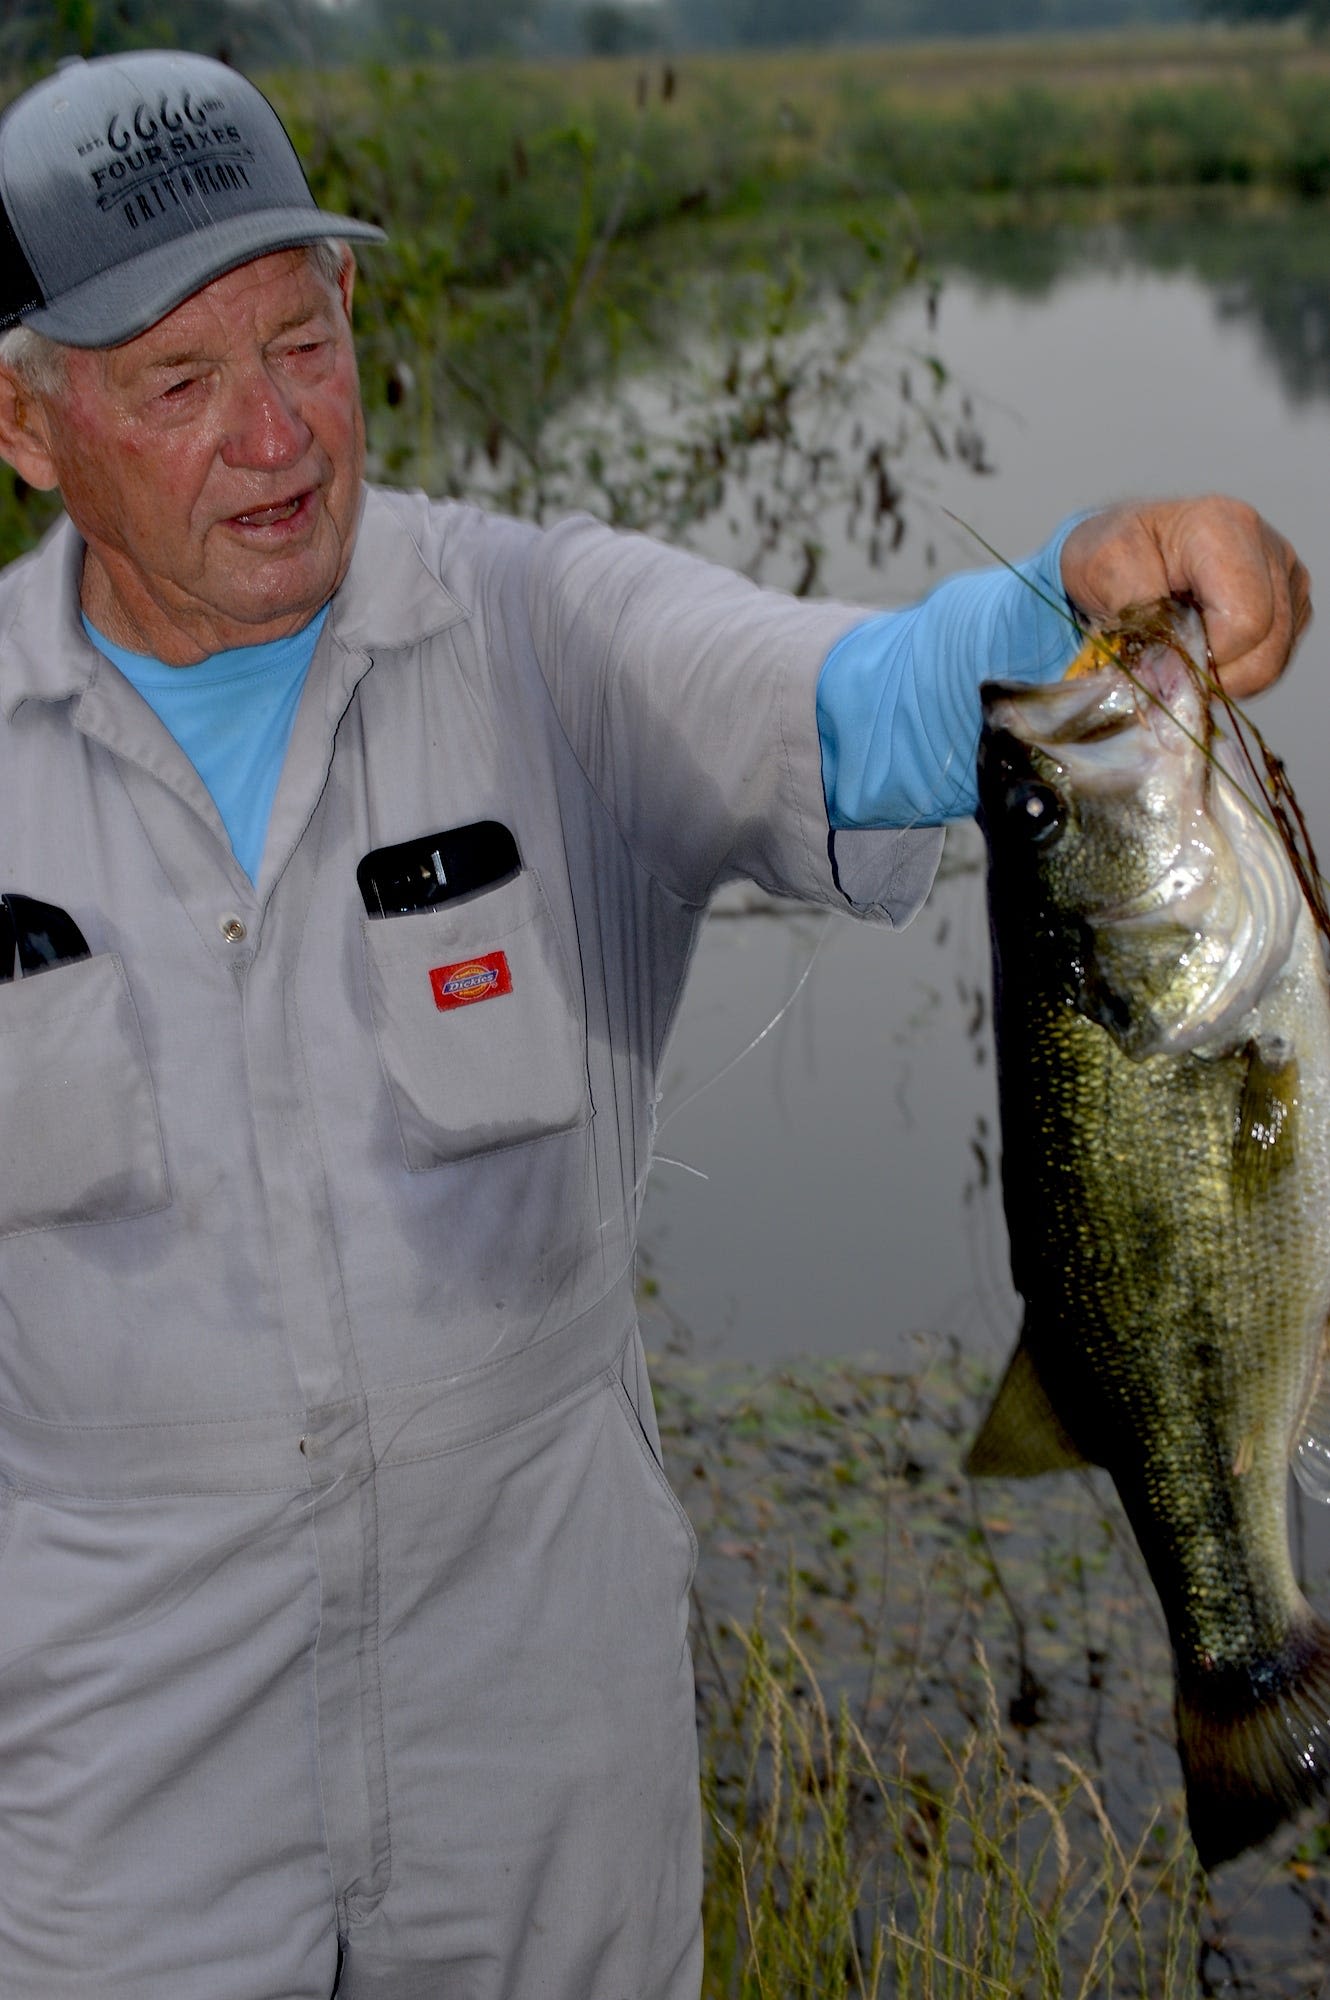 Fishing for bass on a small Texas lake brings back great memories of past days | Leggett